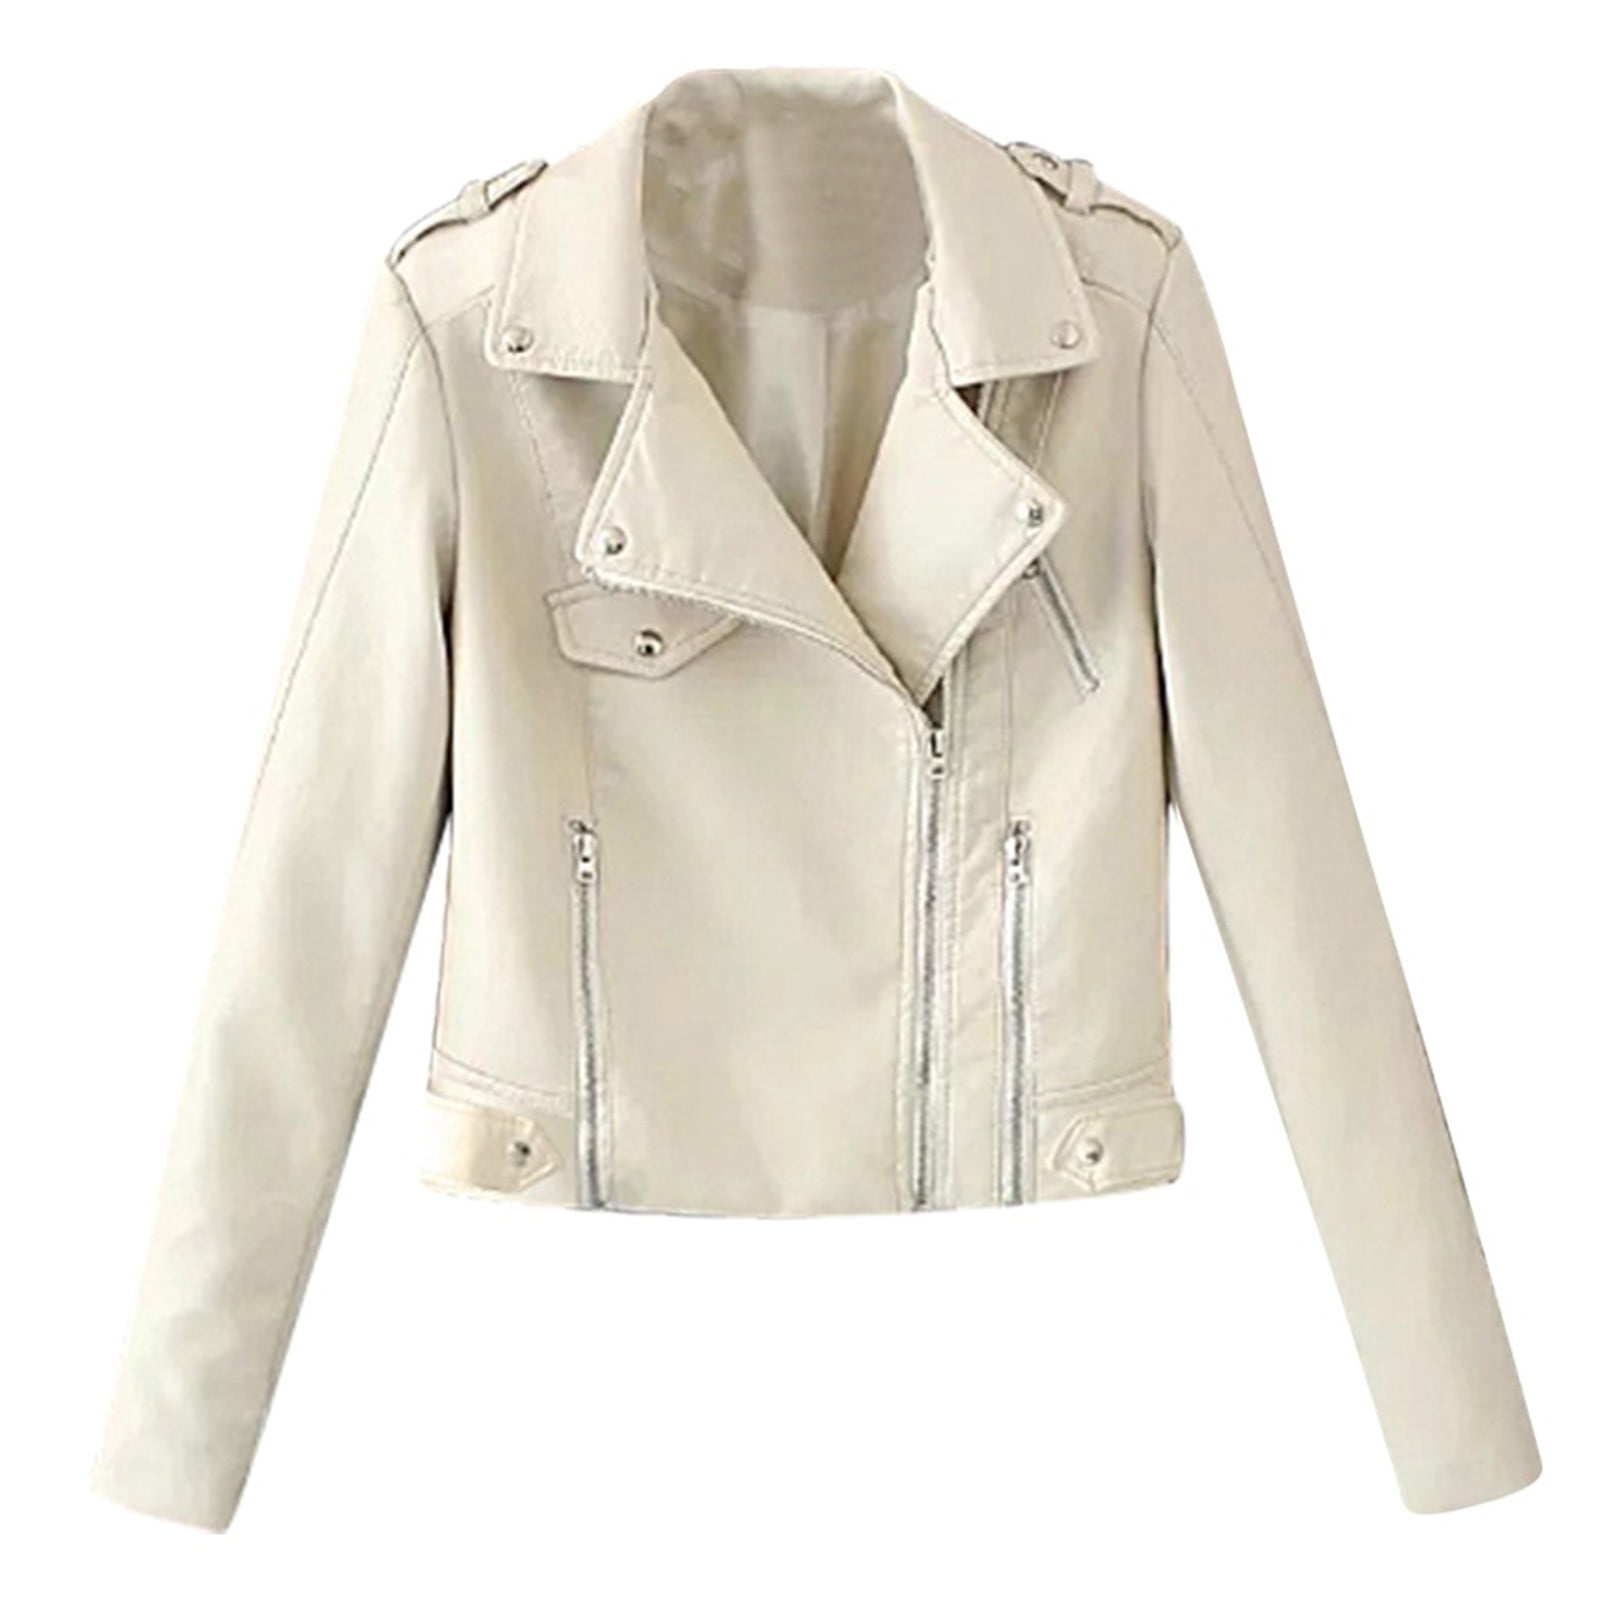  Spring Women's Faux Leather Jacket Motorcycle Red White Coat  Lapel PU Motorcycle Jacket Loose Street Coat : Clothing, Shoes & Jewelry